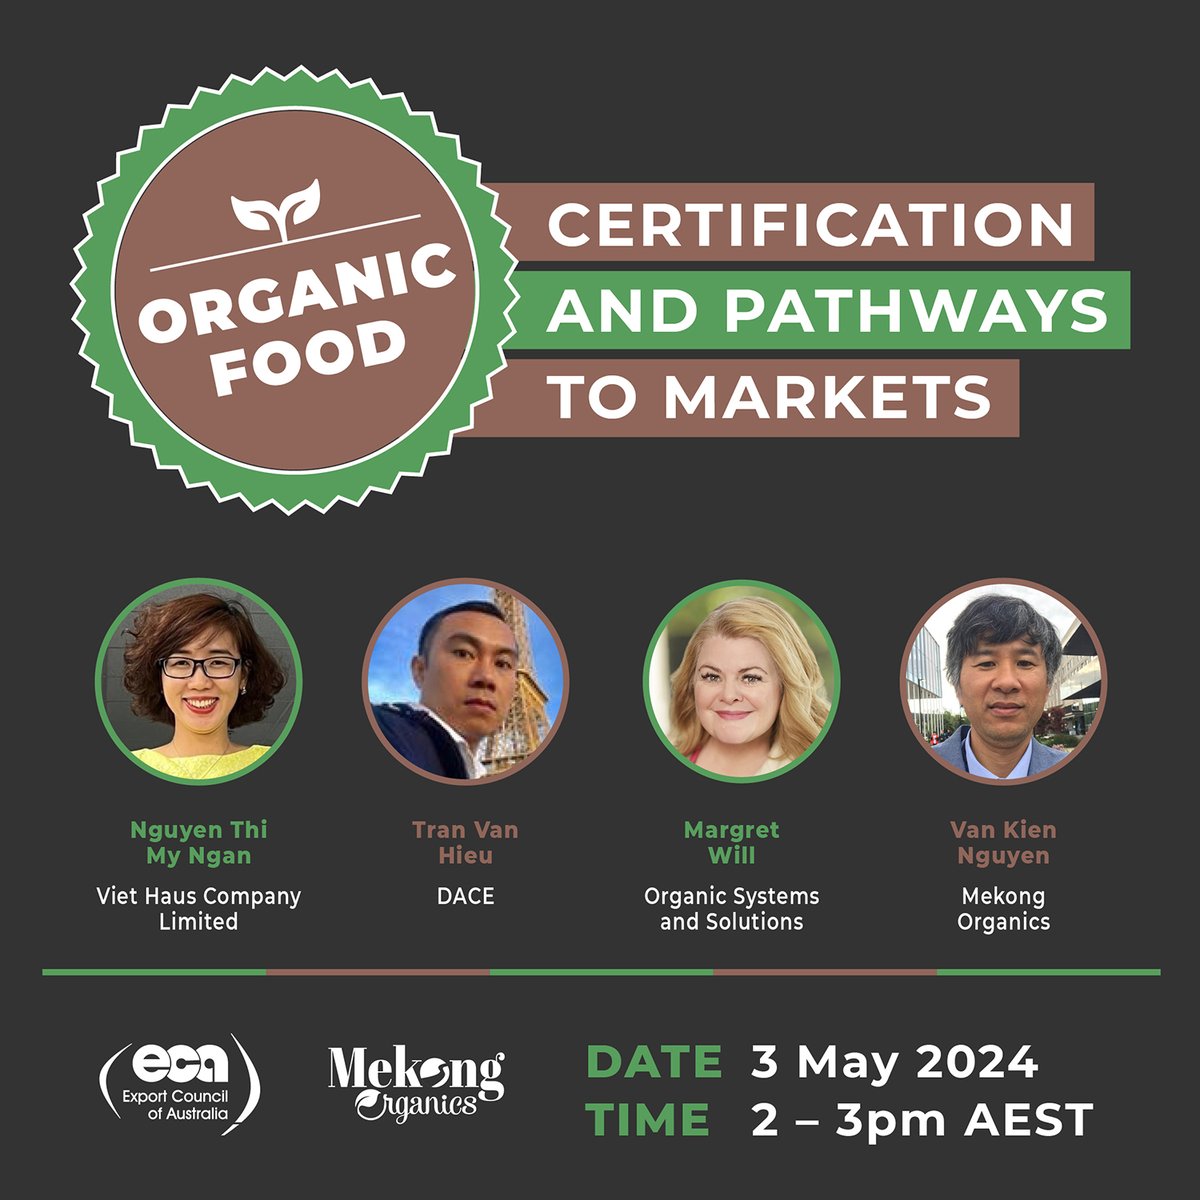 🌱 Join us for an online webinar on Organic Food: Certification and Pathways to Markets!

Listen to expert insights on regulatory compliance, global commercial strategies, and best practices.

Don't miss out, register now! Link in bio.
#foodbusiness #exporting